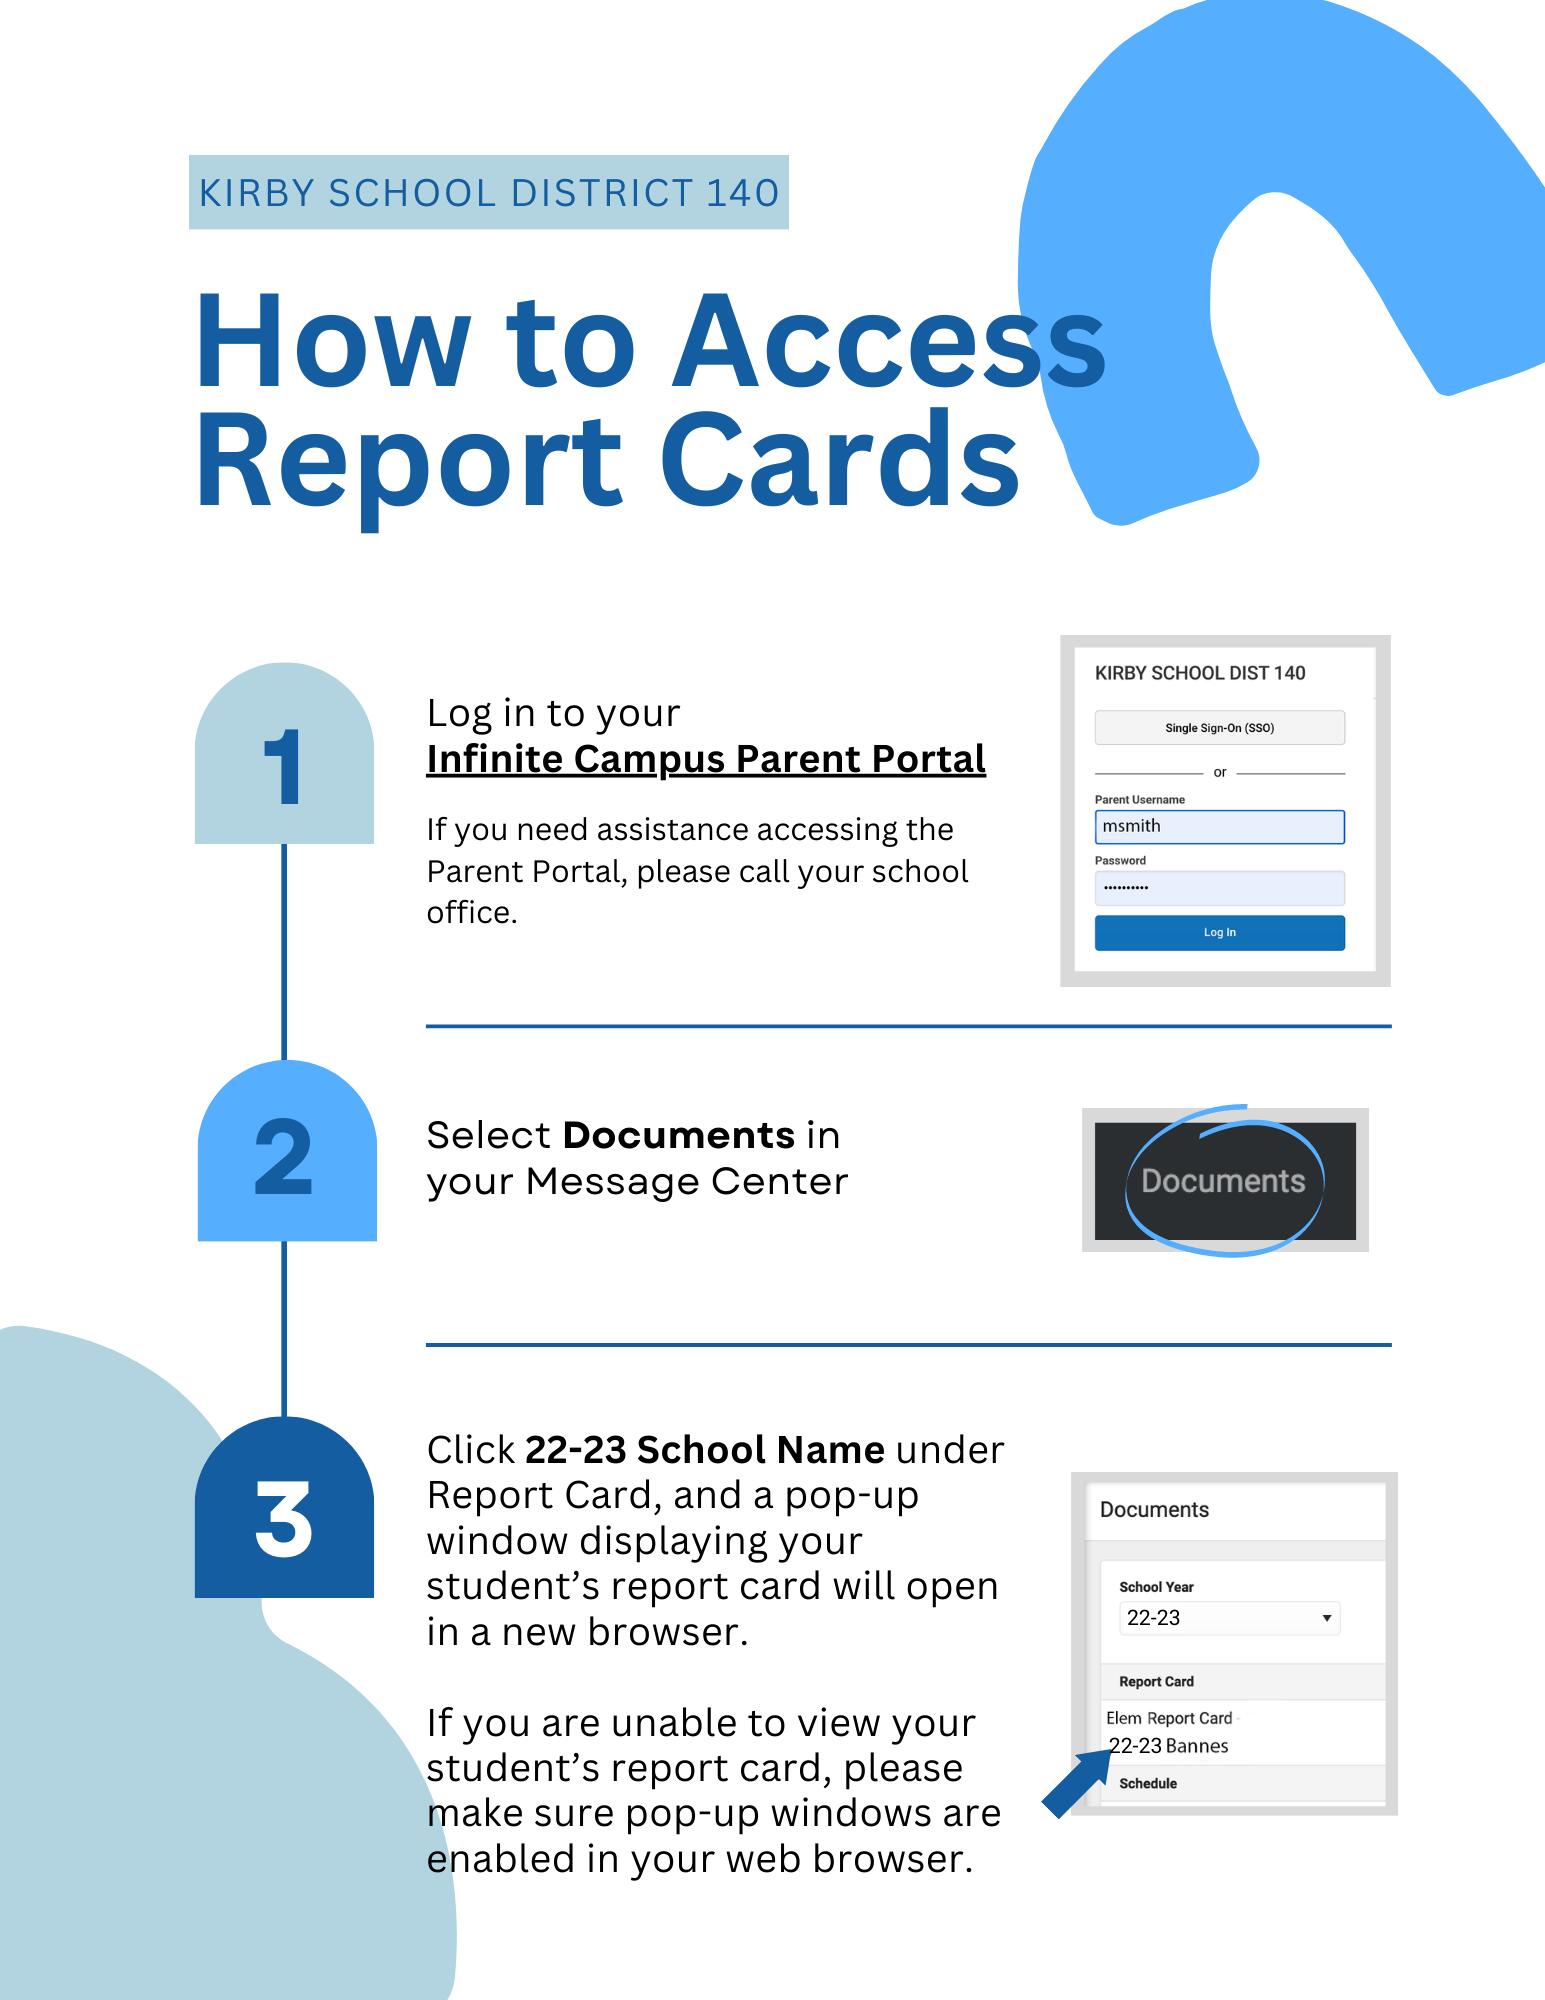 How to access report cards information